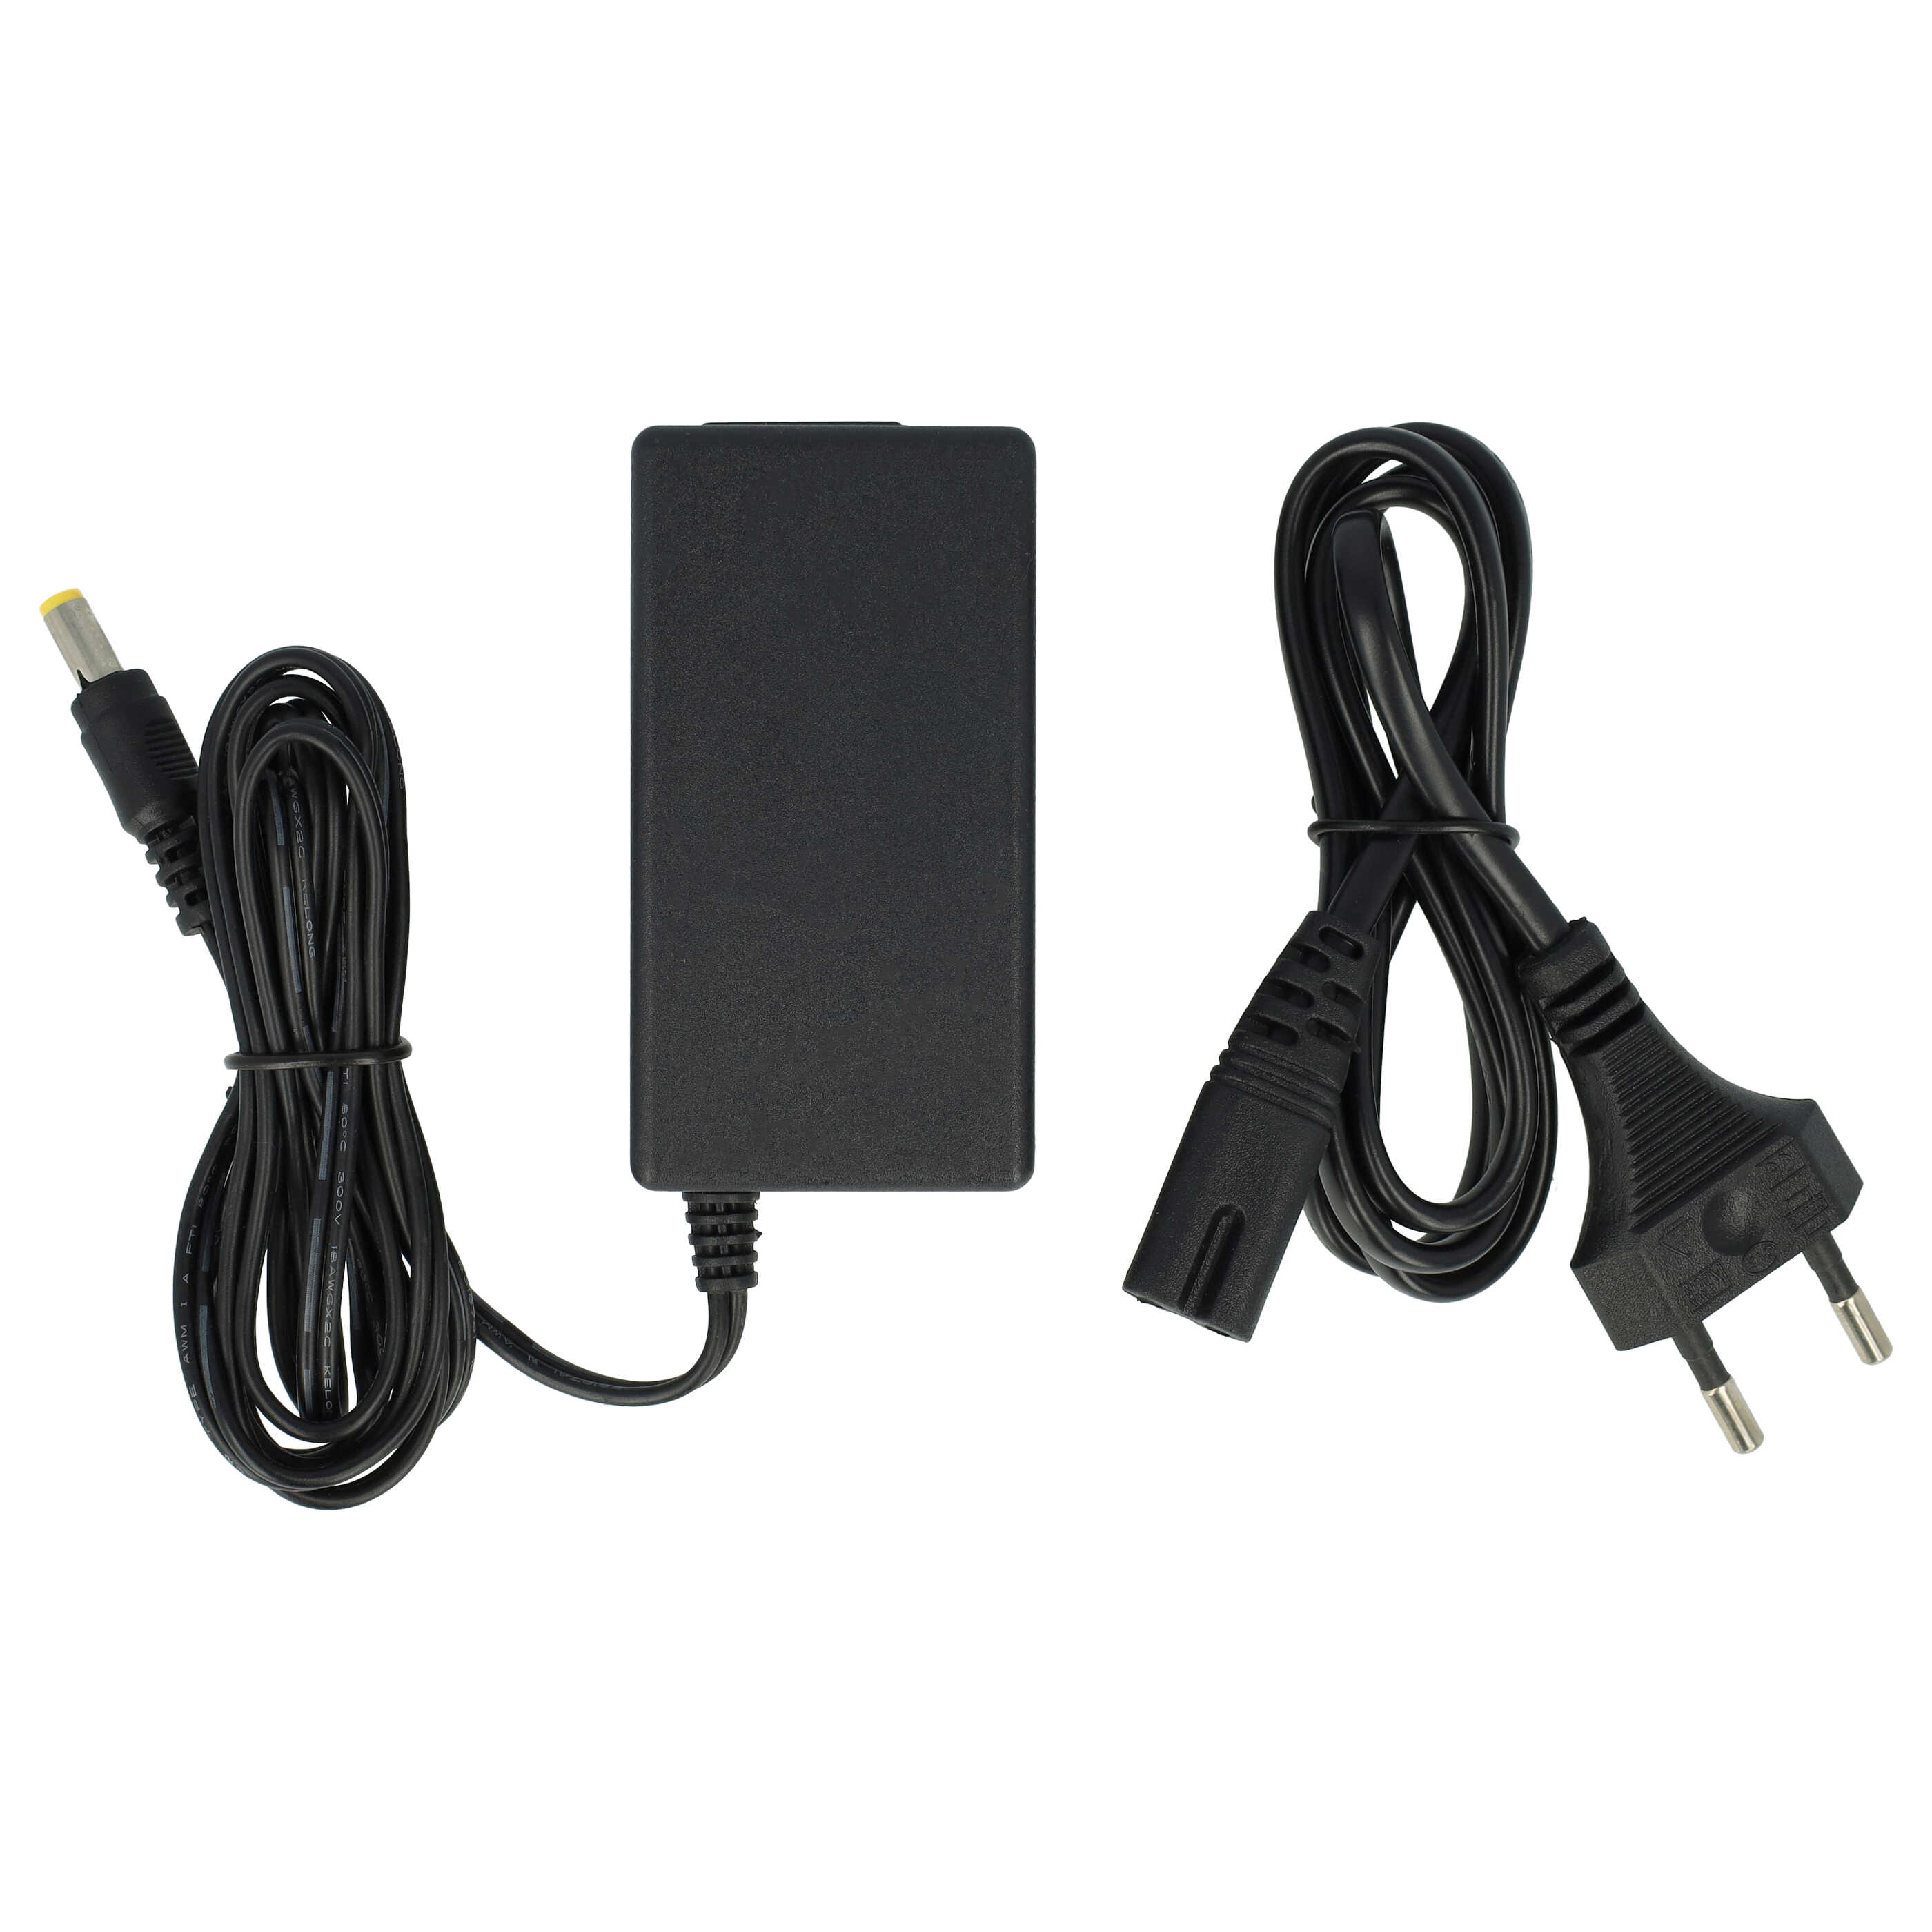 Mains Power Adapter replaces HP 0957-2291, L2694-80010, L1970-80001, C9870-84203 for Printer - 200 cm